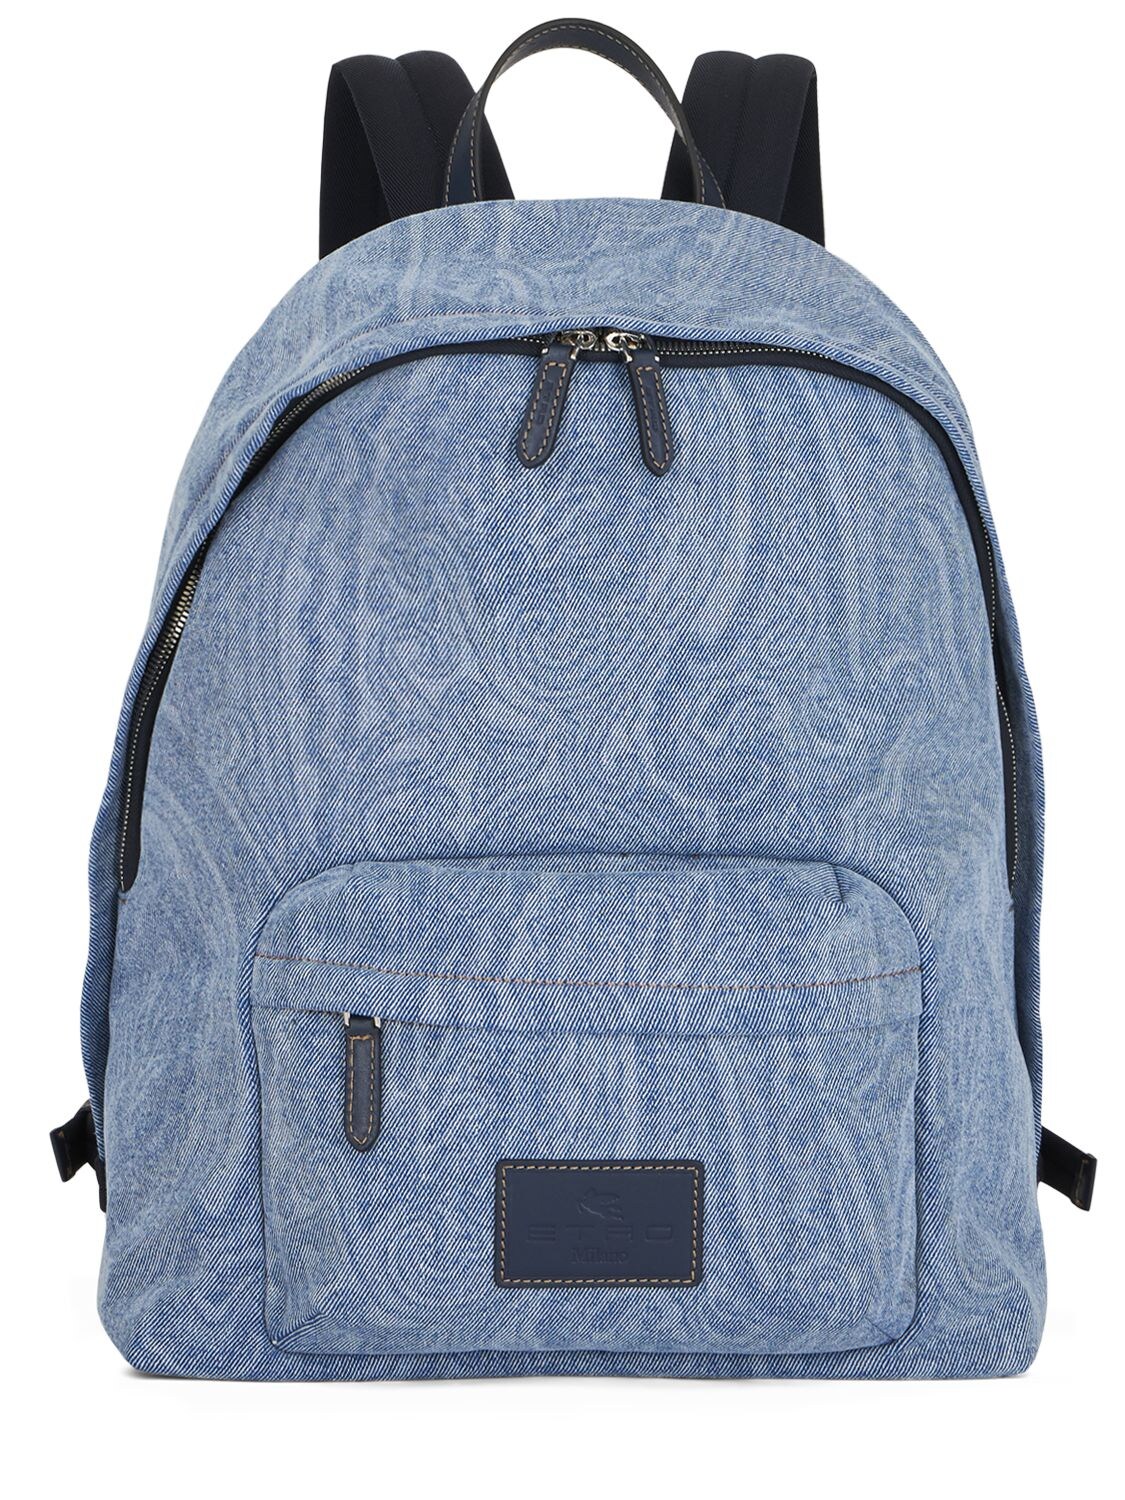 ETRO PAISLEY PRINT COTTON BACKPACK